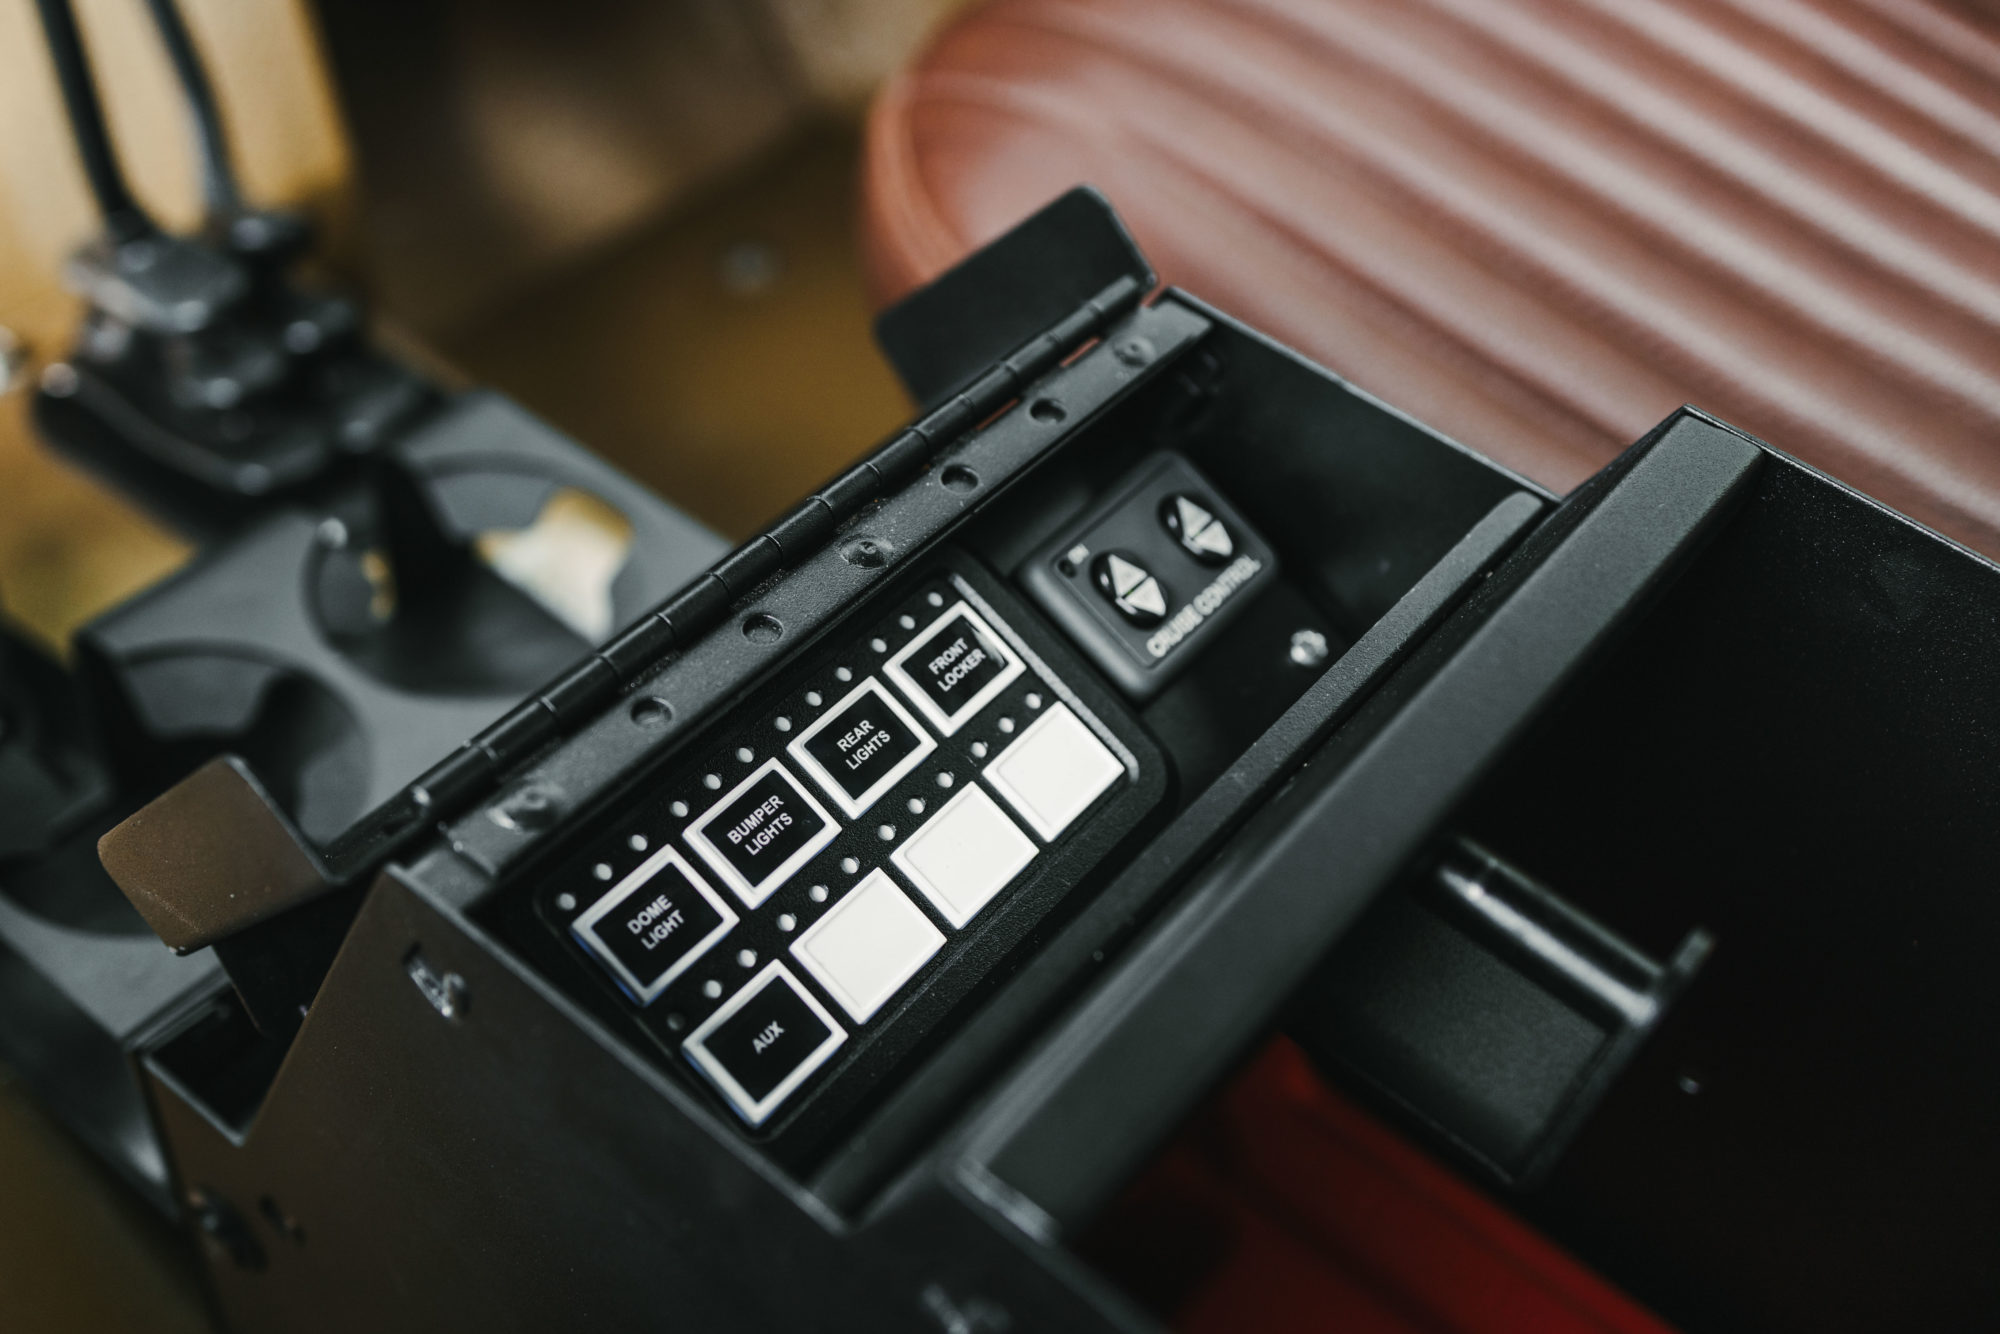 Center console switches